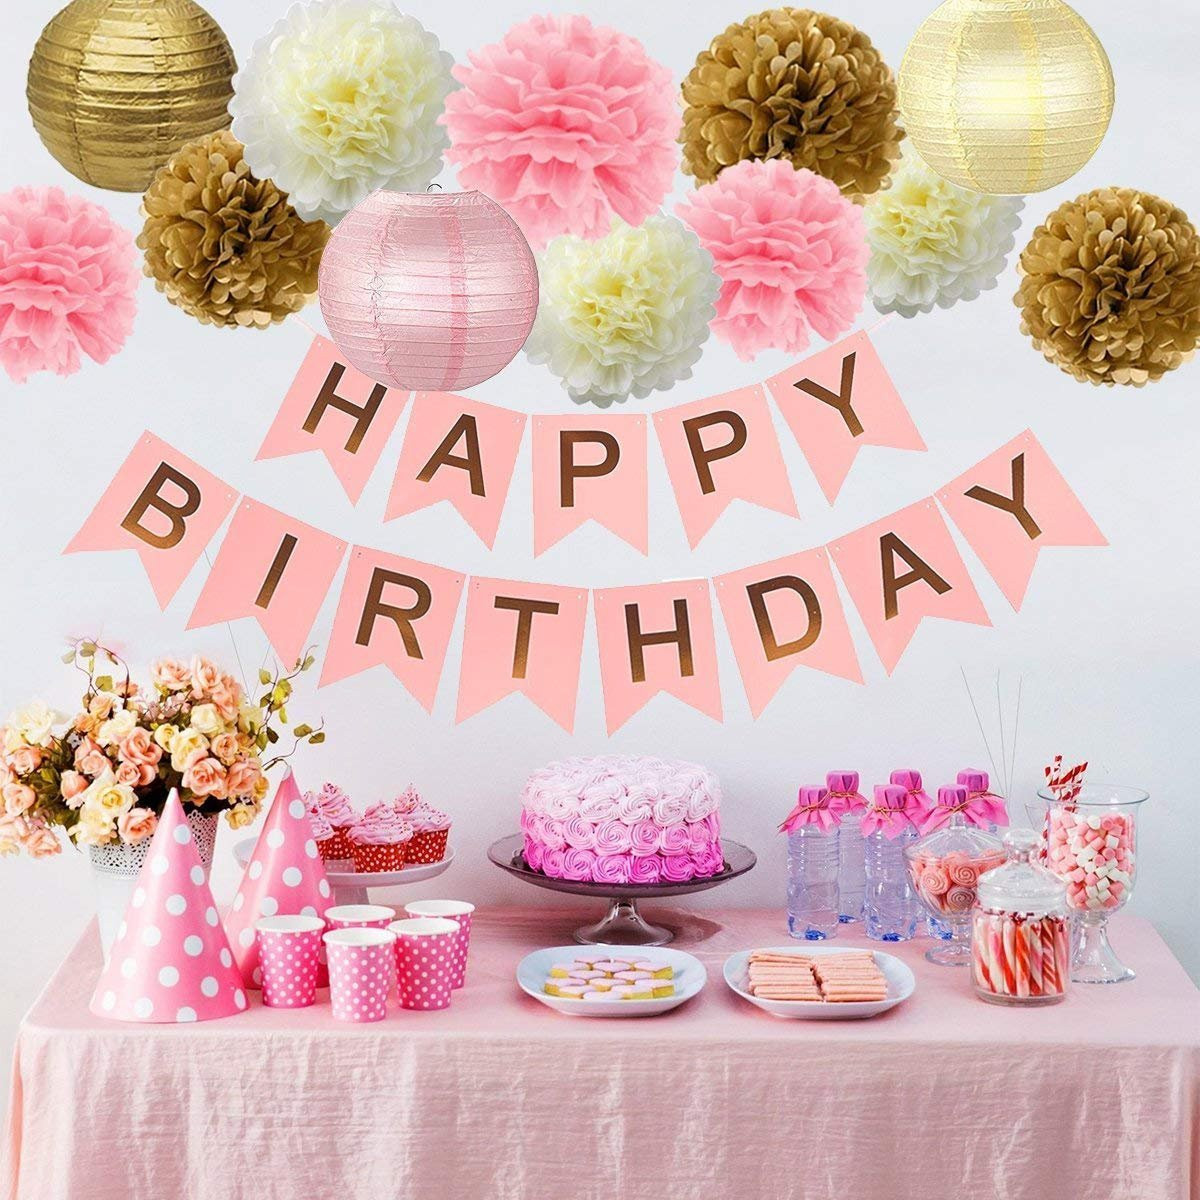 Pink And Gold Birthday Party Supplies
 PINK GOLD BIRTHDAY Decorations Pink Birthday Banner